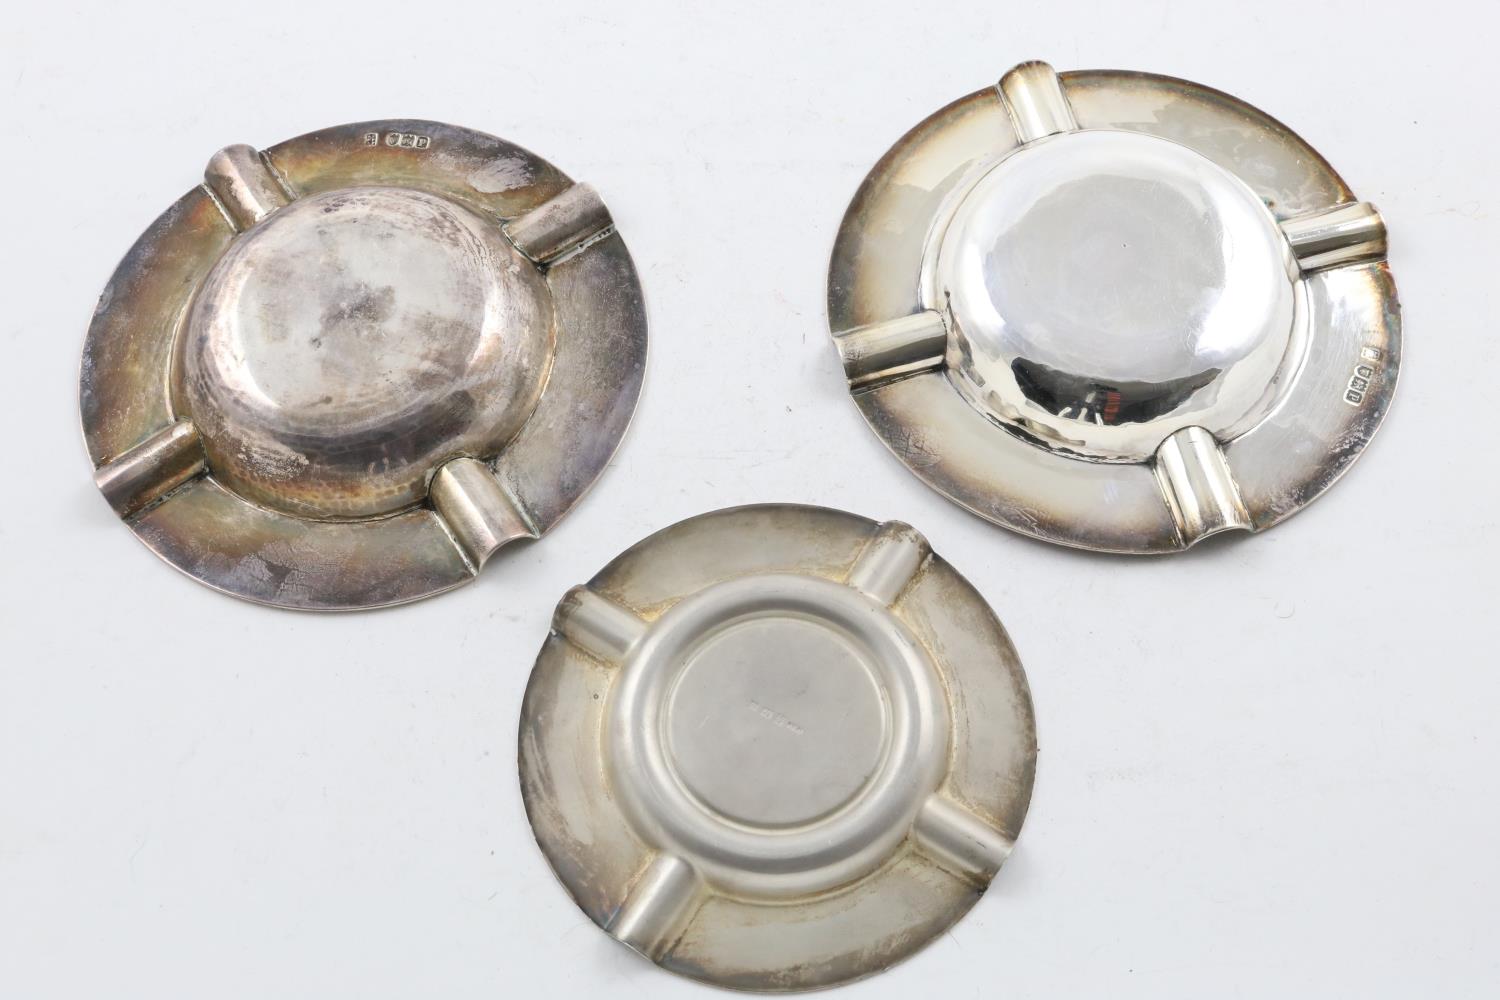 A PAIR OF GEORGE V ASHTRAYS. circular, with 4 cigarette rests on each, crested, by Pairpoint - Image 2 of 2